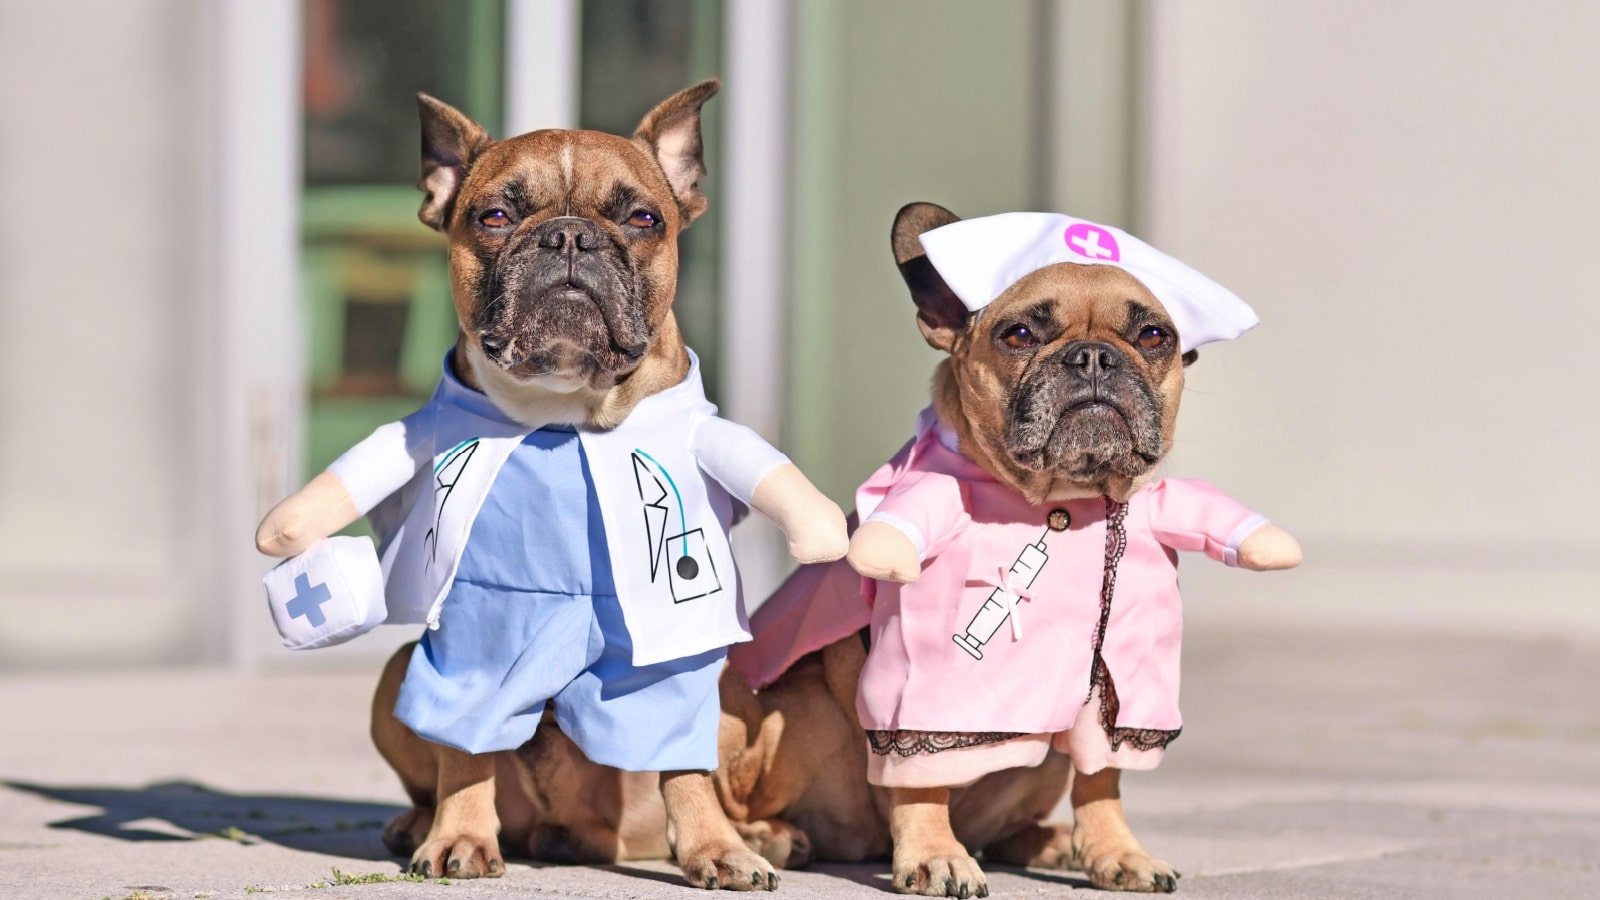 Dogs dressed up as doctor and nurse